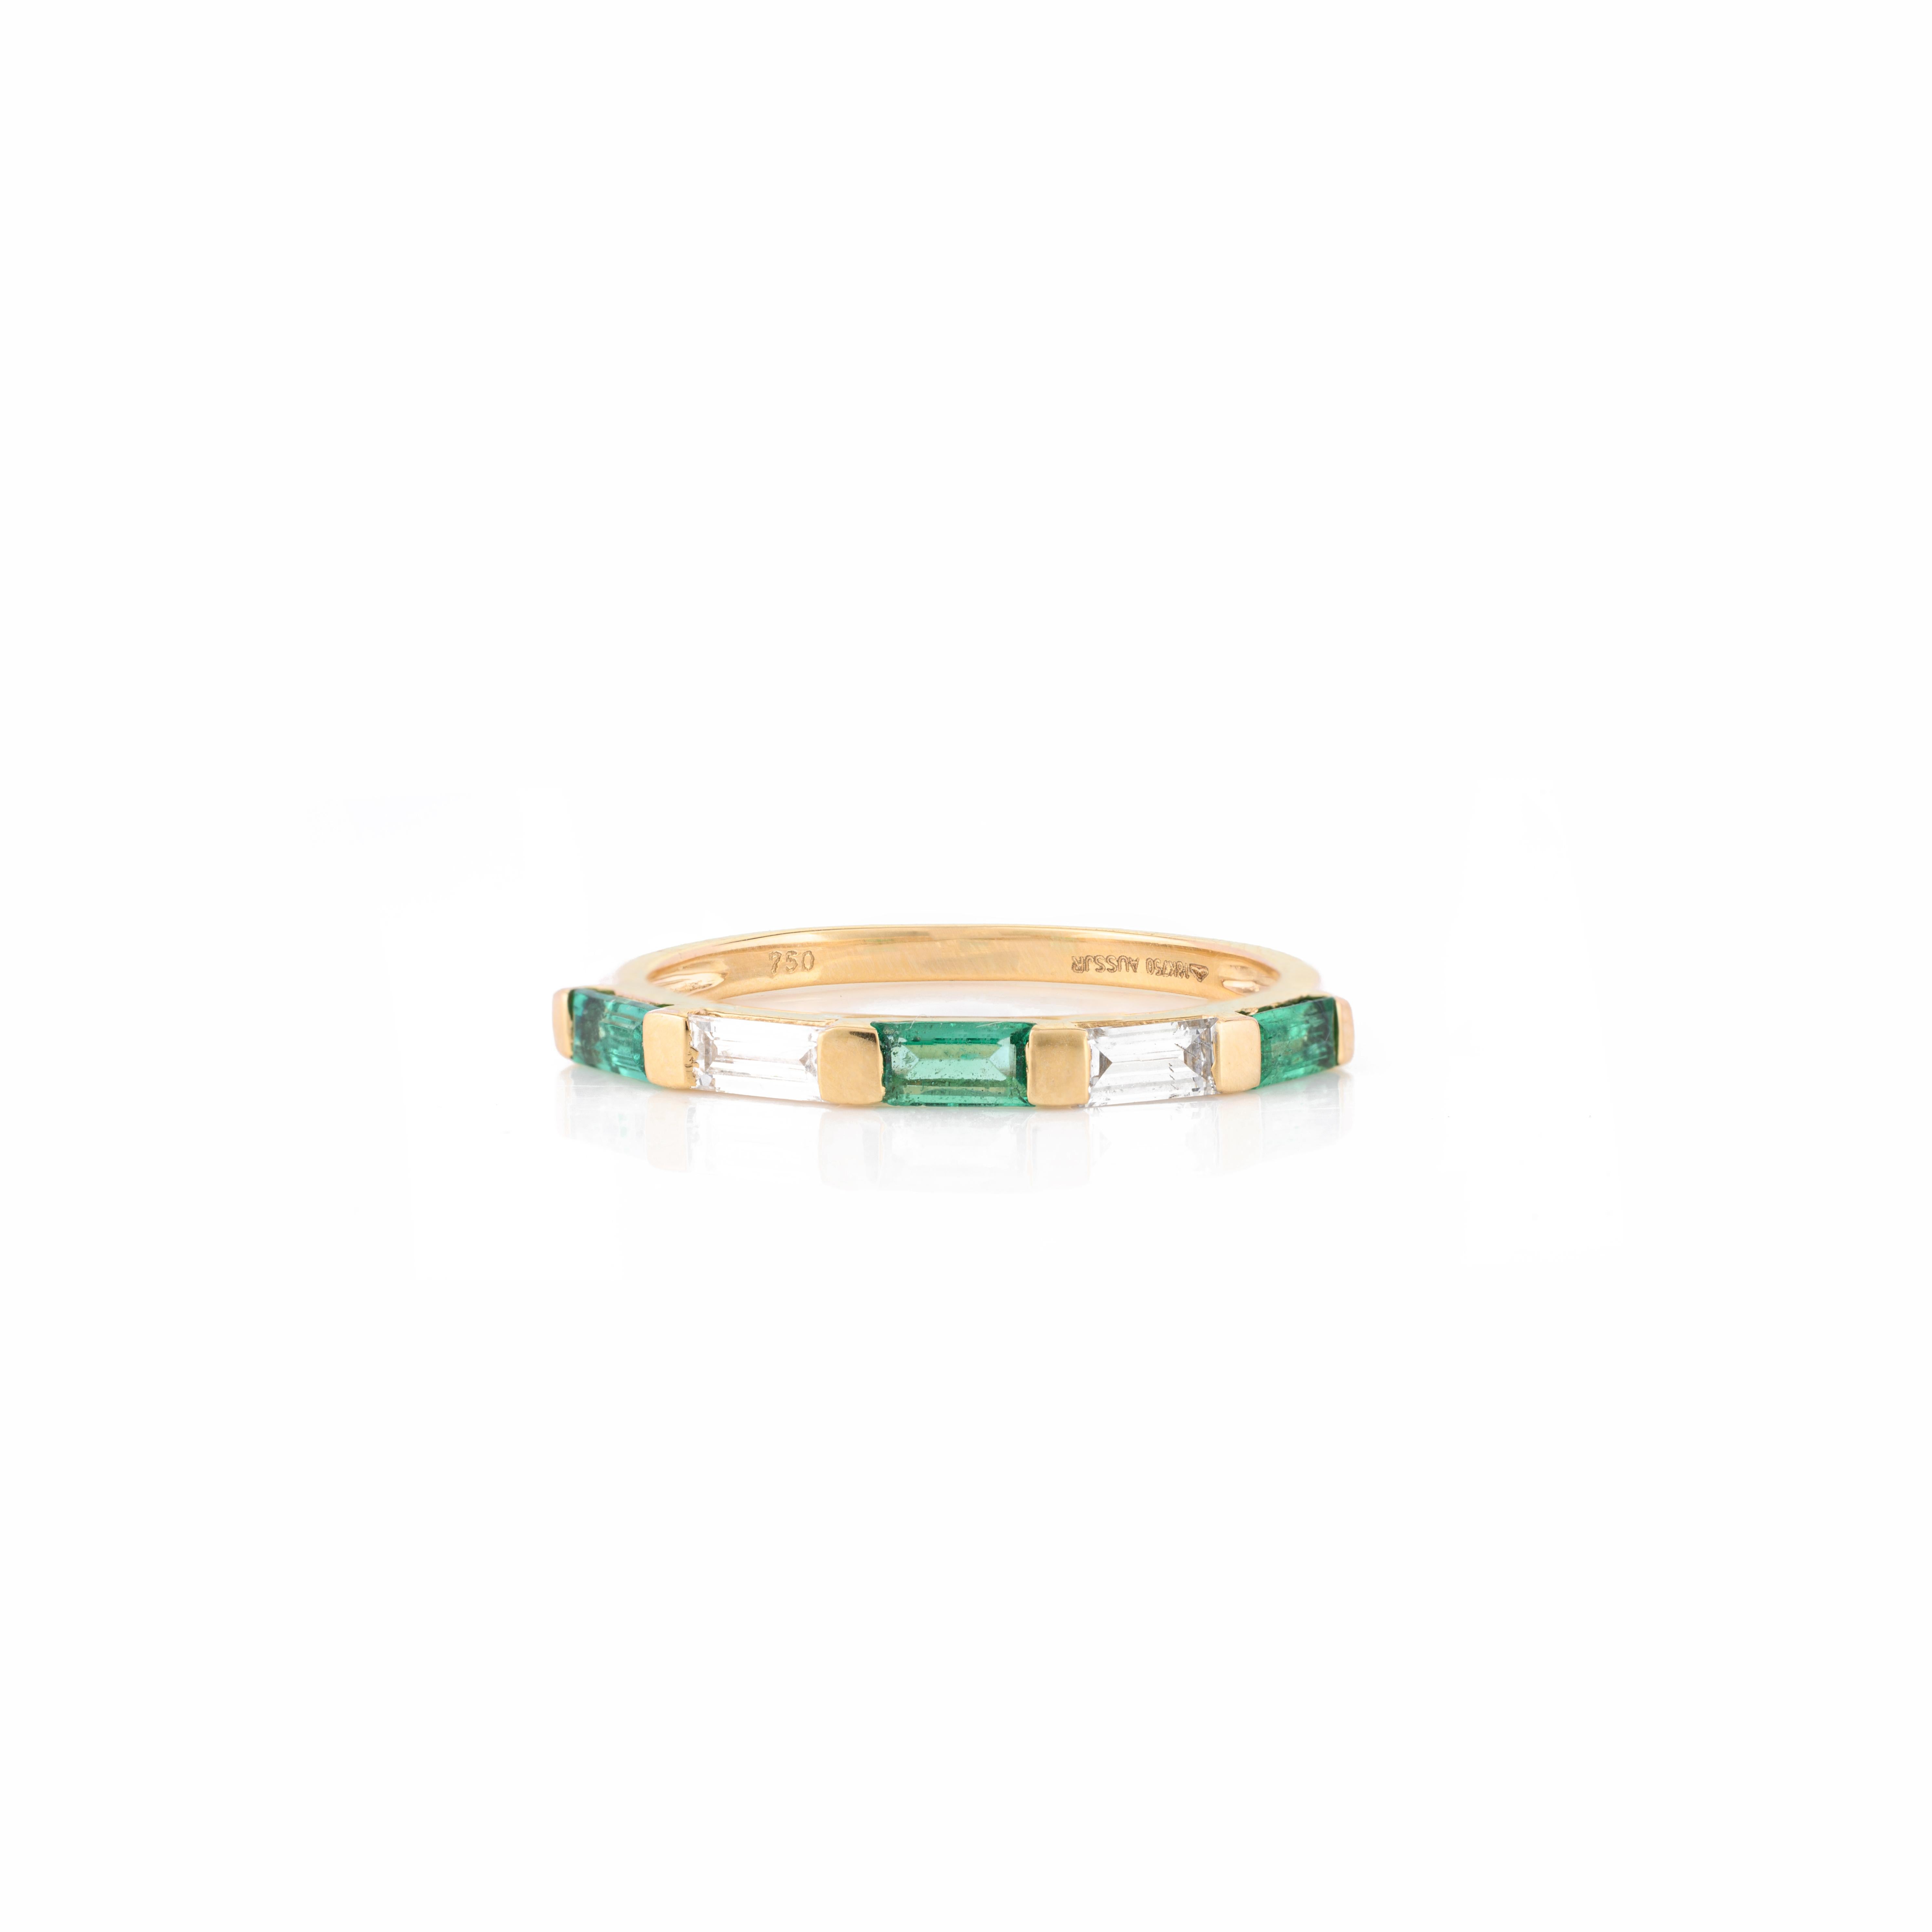 For Sale:  Alternate Baguette Emerald Diamond Stackable Band Ring in 18k Yellow Gold 10